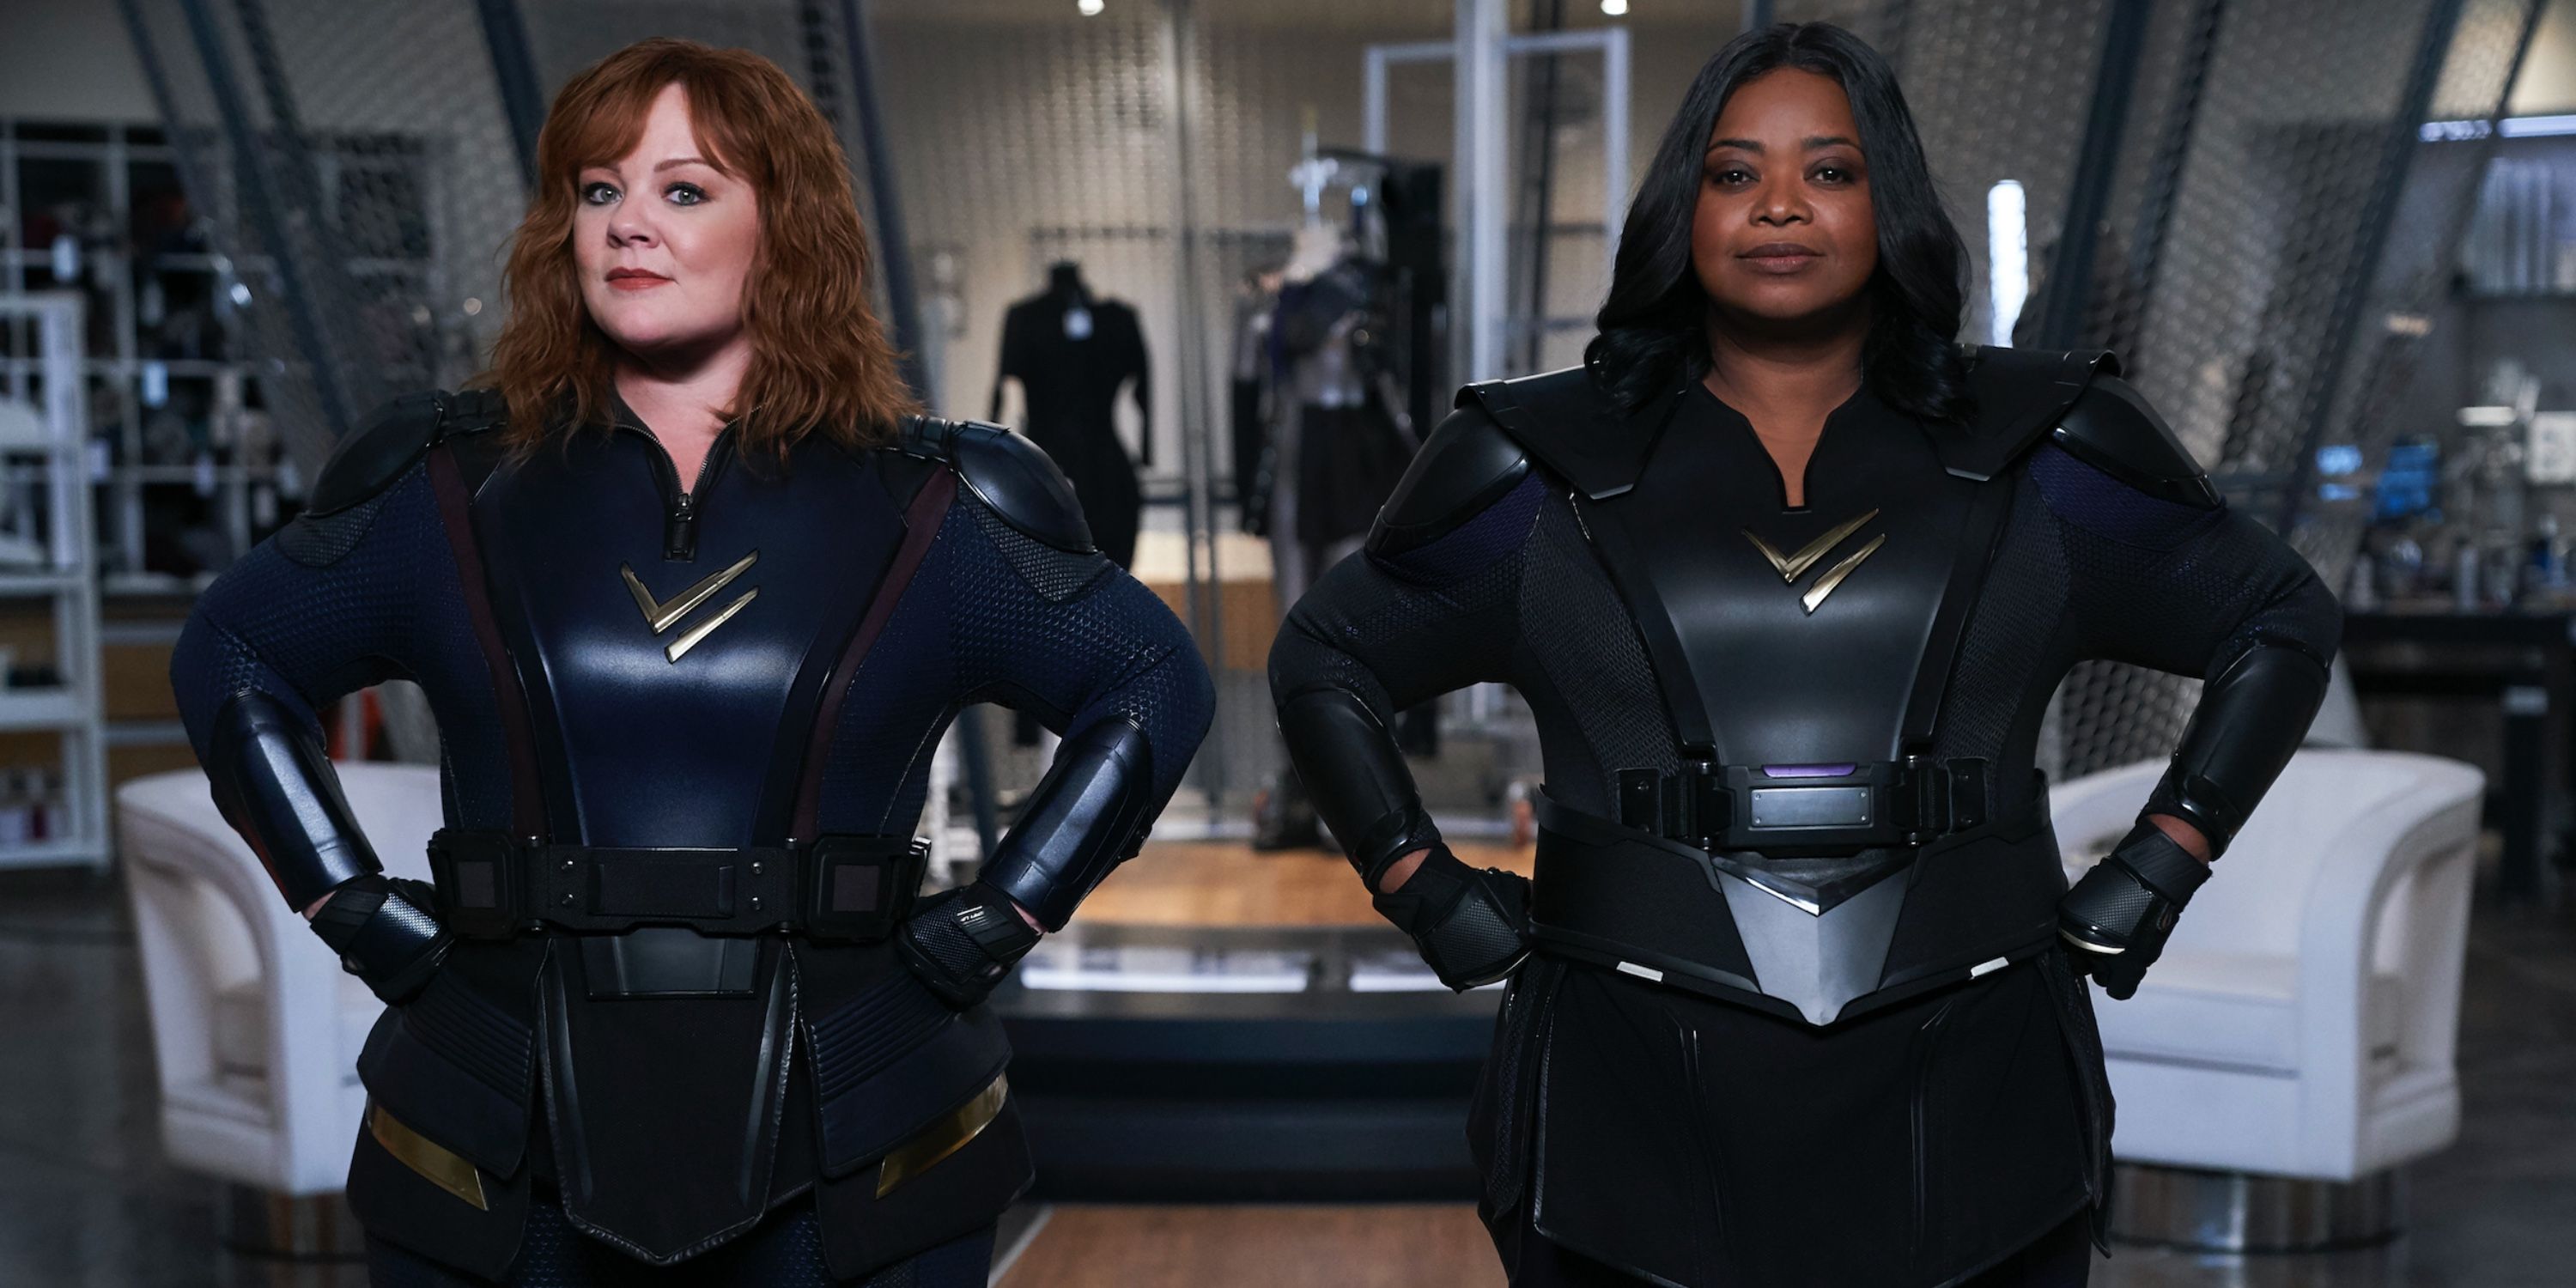 Melissa McCarthy as Lydia Berman and Octavia Spencer as Emily Stanton in Thunder Force on Netflix